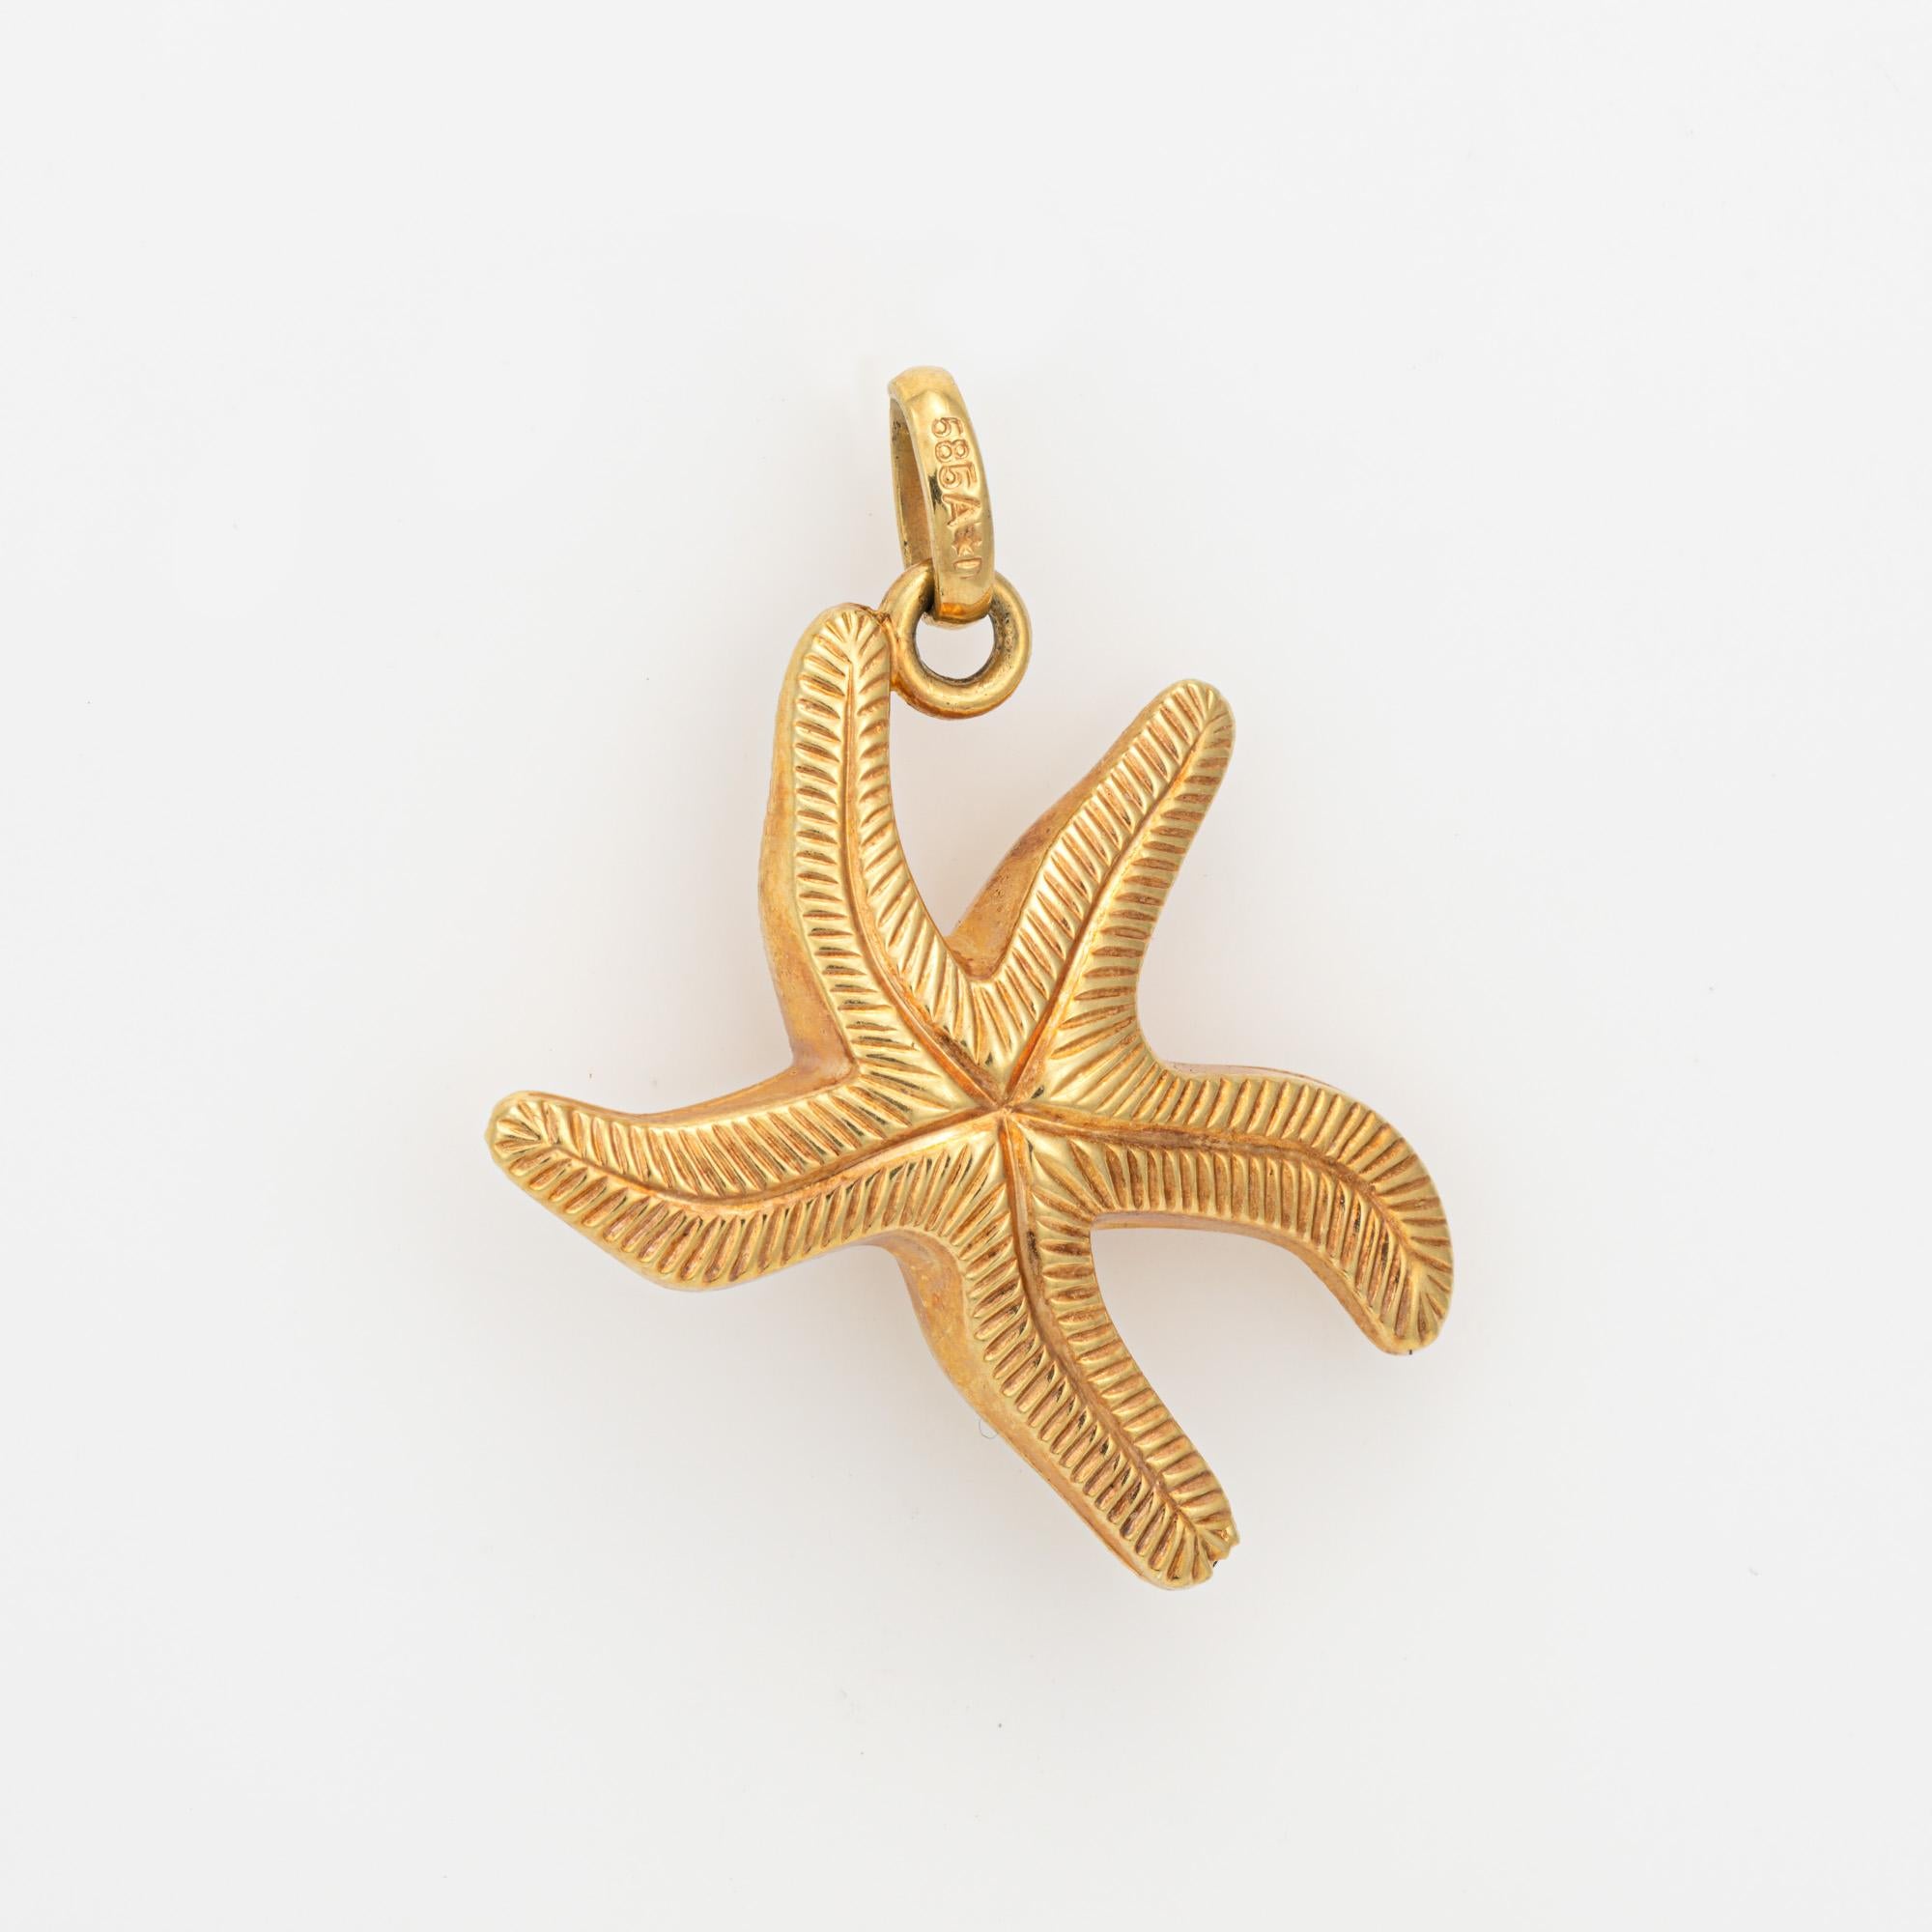 Finely detailed vintage Starfish charm crafted in 14k yellow gold.  

The nicely detailed starfish is rendered in lifelike detail with green and red enamel details. The starfish is hollow and light to the touch at 2.1 grams. 

The charm is in very